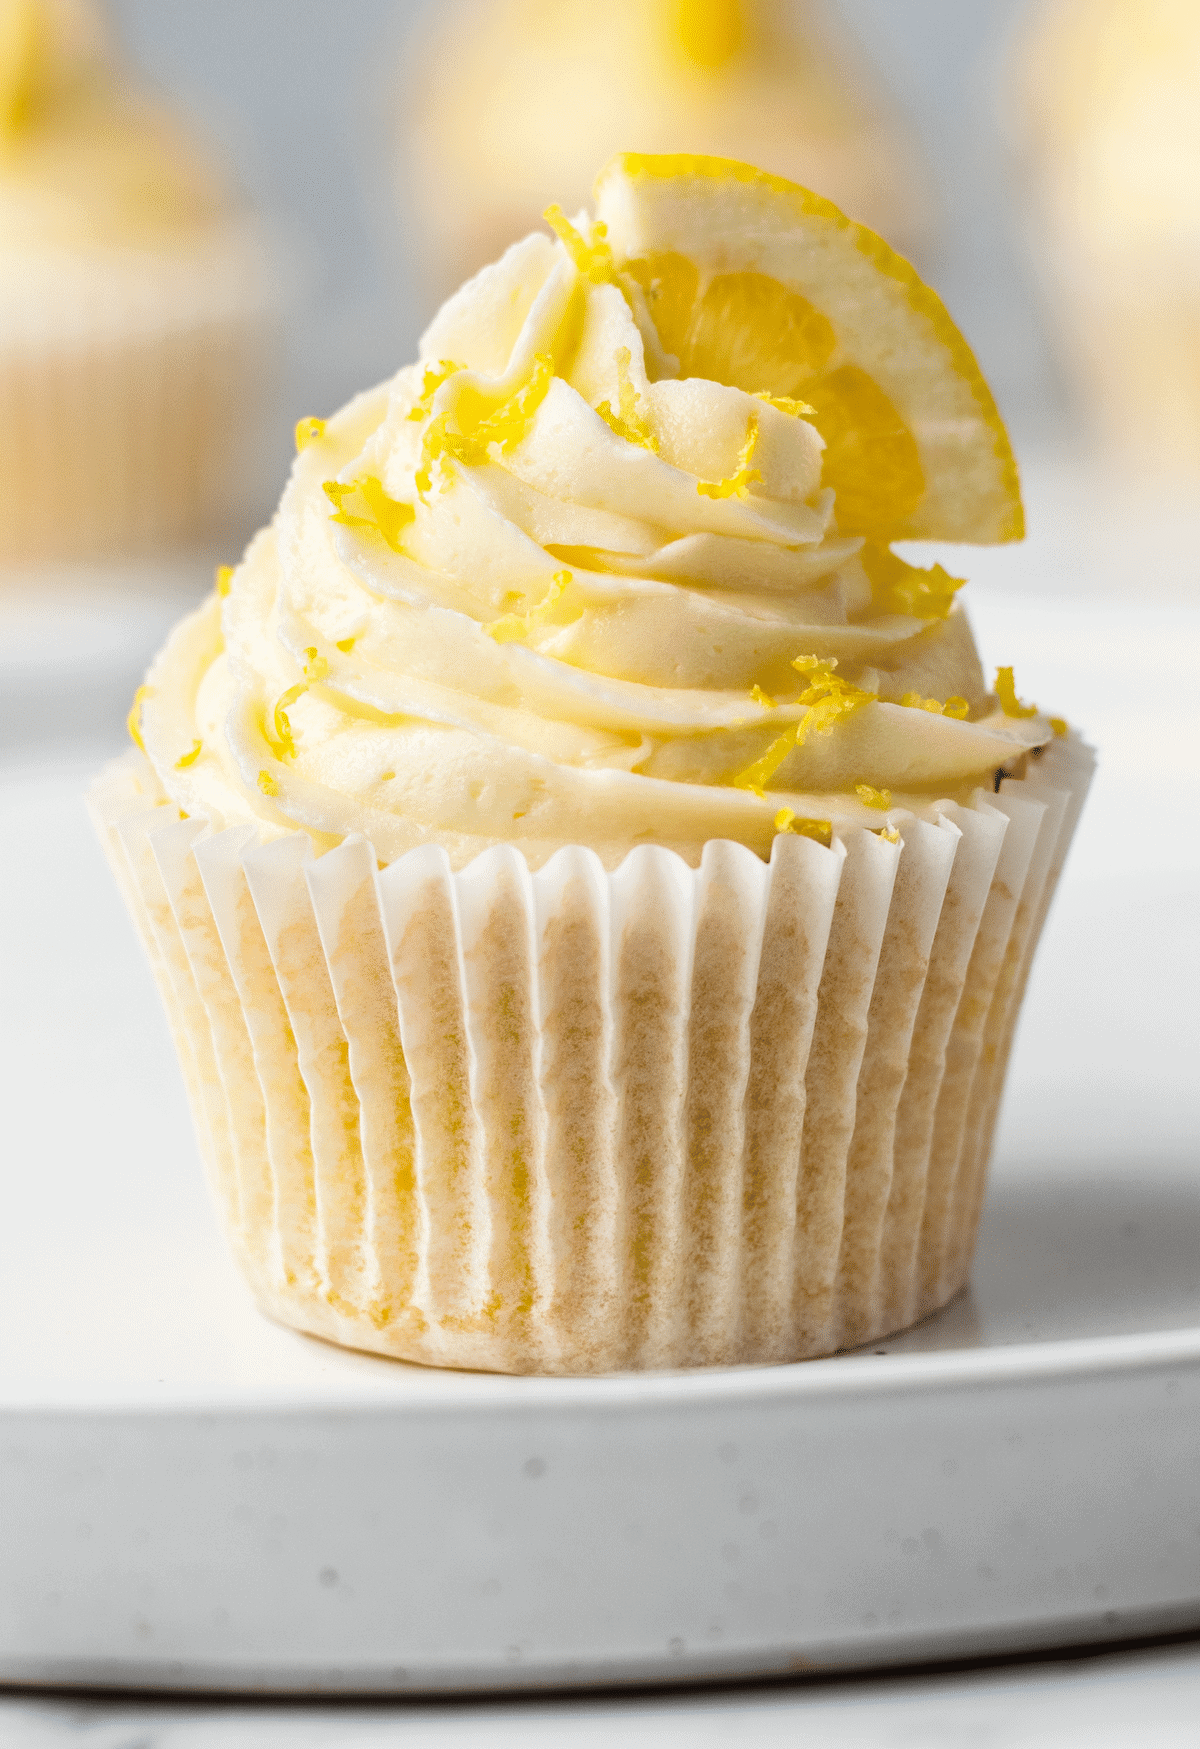 Front view of a lemon cupcake with frosting